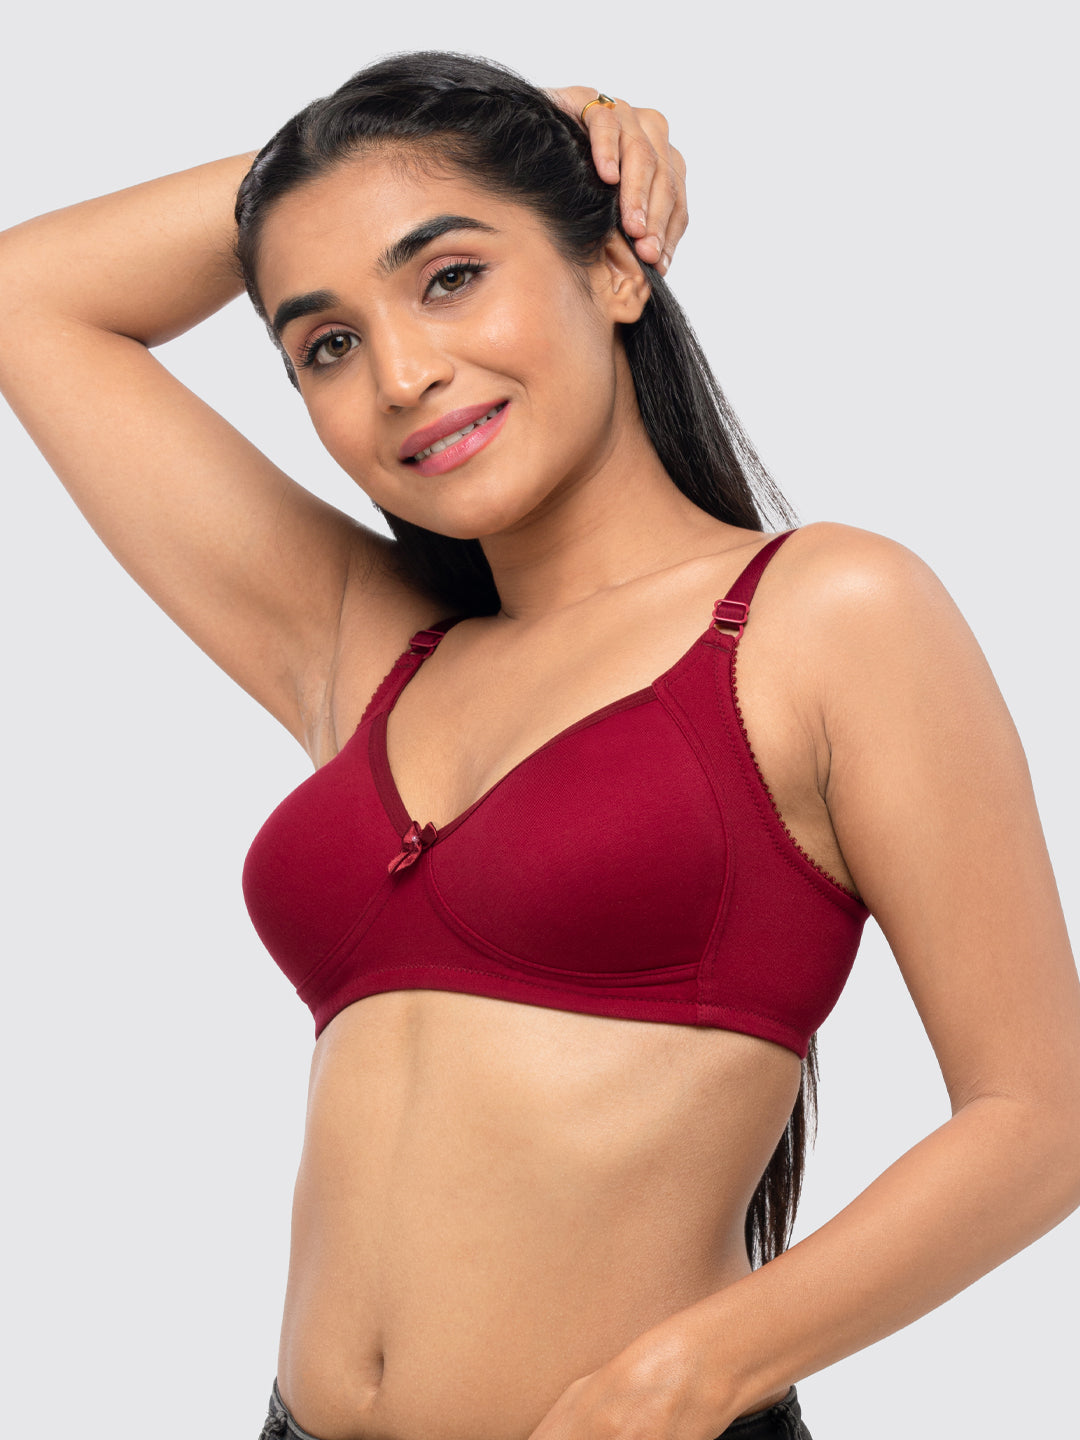 Lovable Dark Maroon Non Padded Non Wired Full Coverage Bra Contours_D Maroon